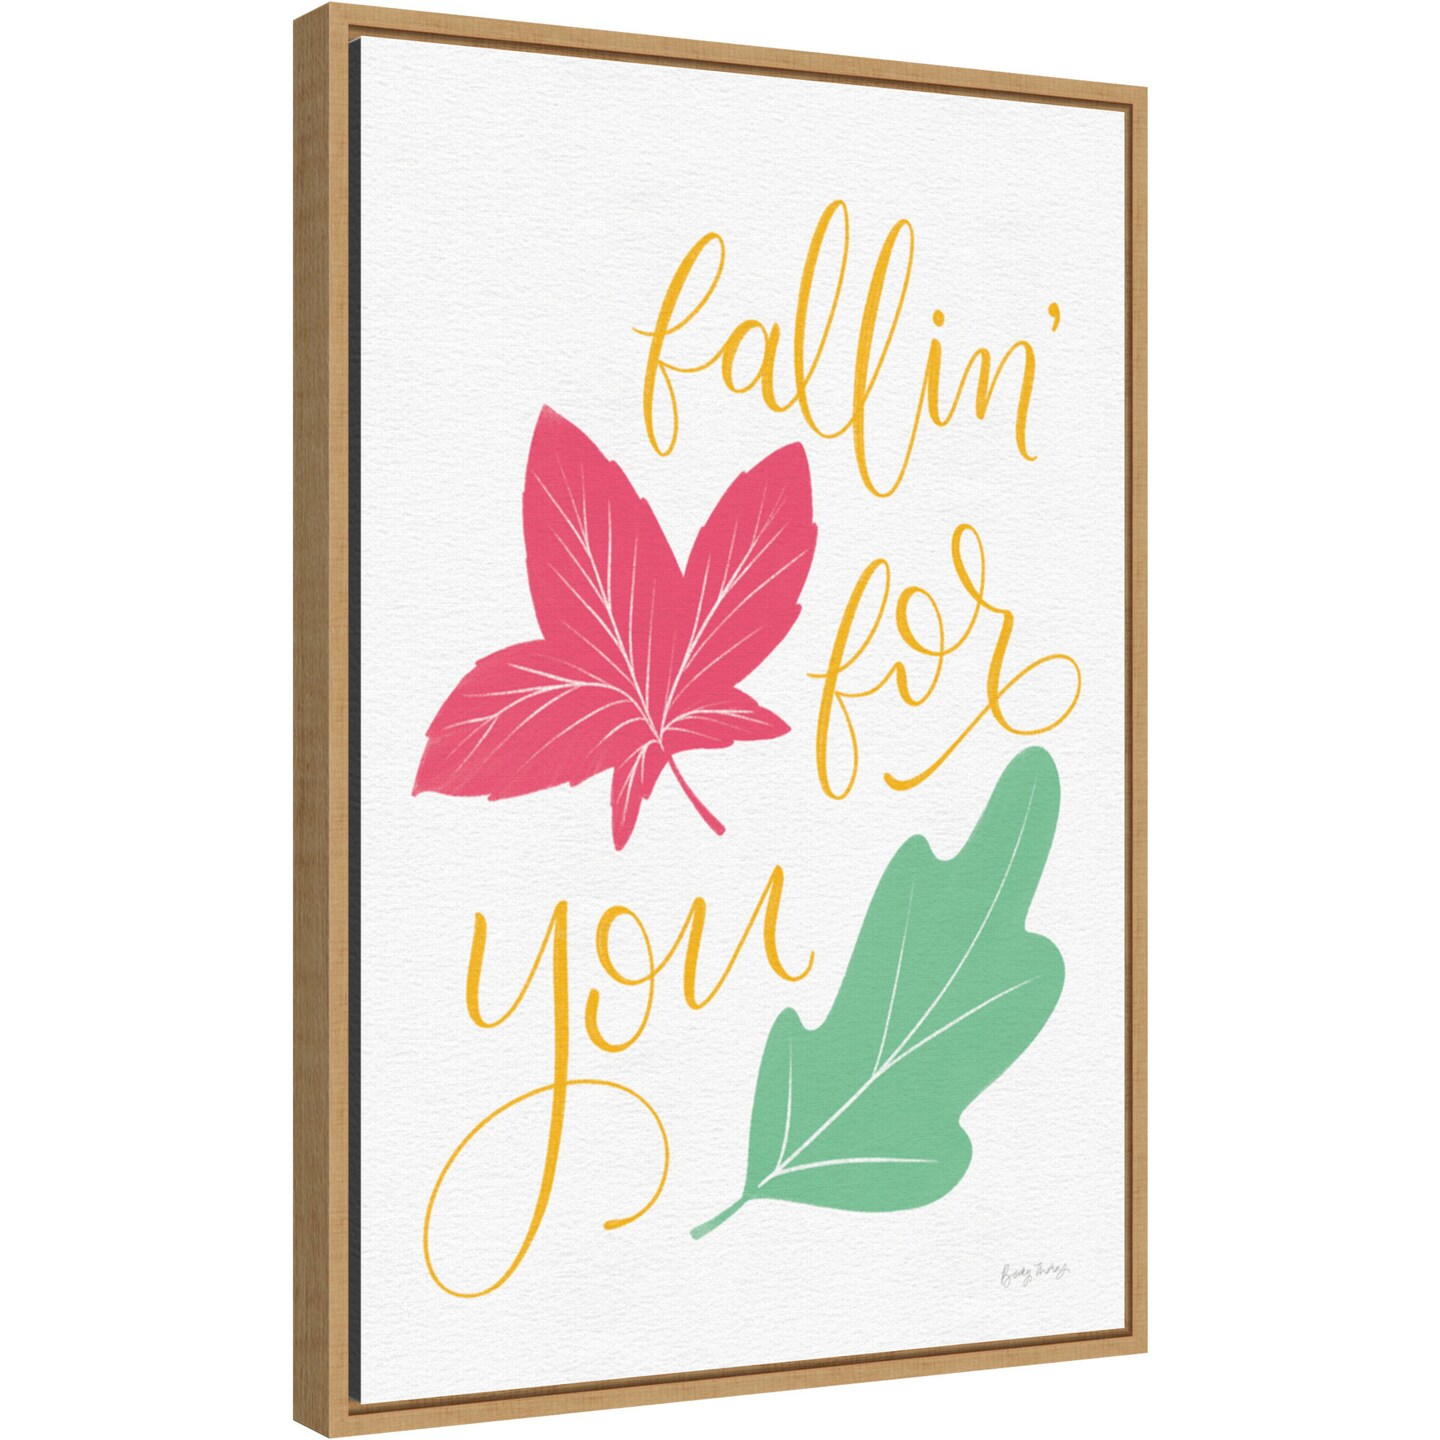 Fallin For You by Becky Thorns 16-in. W x 23-in. H. Canvas Wall Art Print Framed in Natural